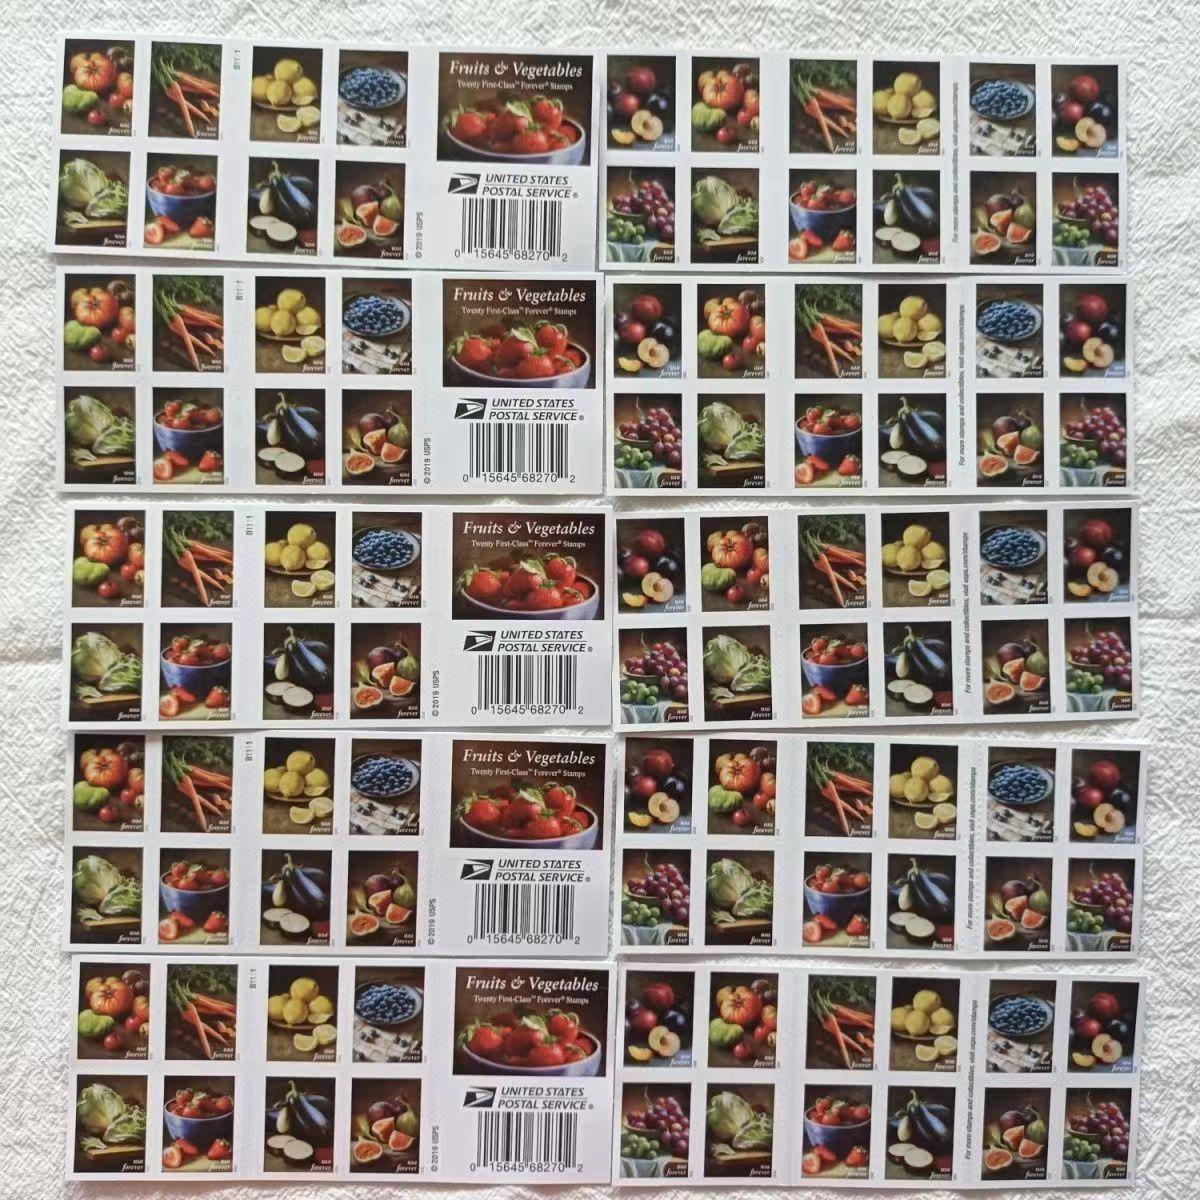 A sheet of Fruits and Vegetables 2020 - 5 Booklets / 100 Pcs stamp booklets featuring colorful images of various fruits and vegetables on a wooden table.